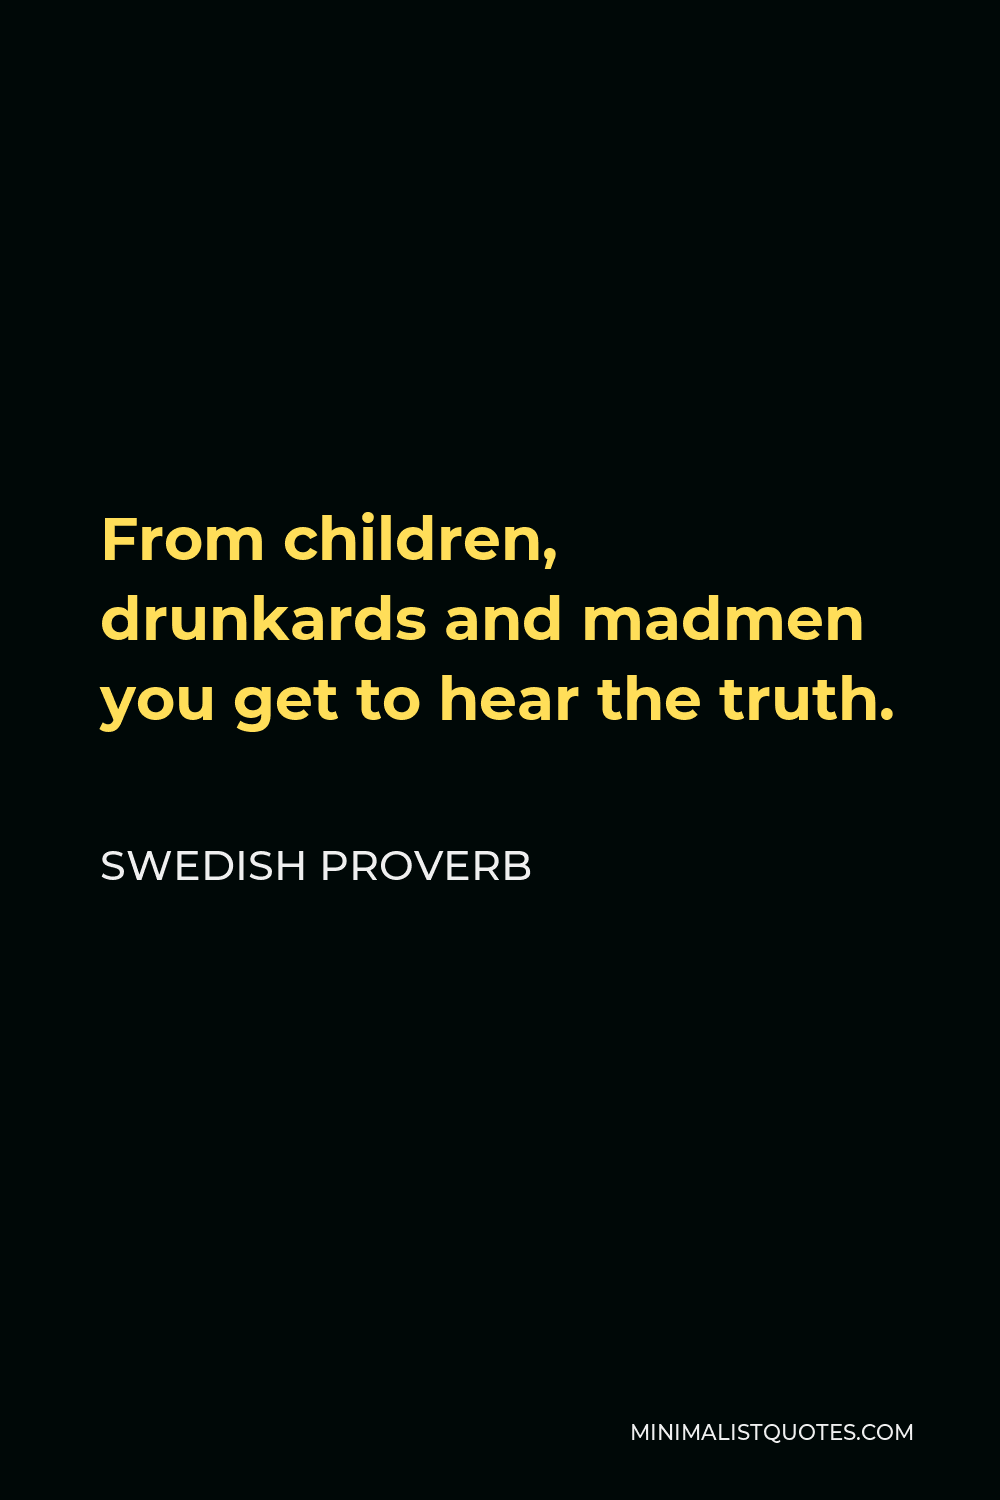 Swedish Proverb Quote - From children, drunkards and madmen you get to hear the truth.